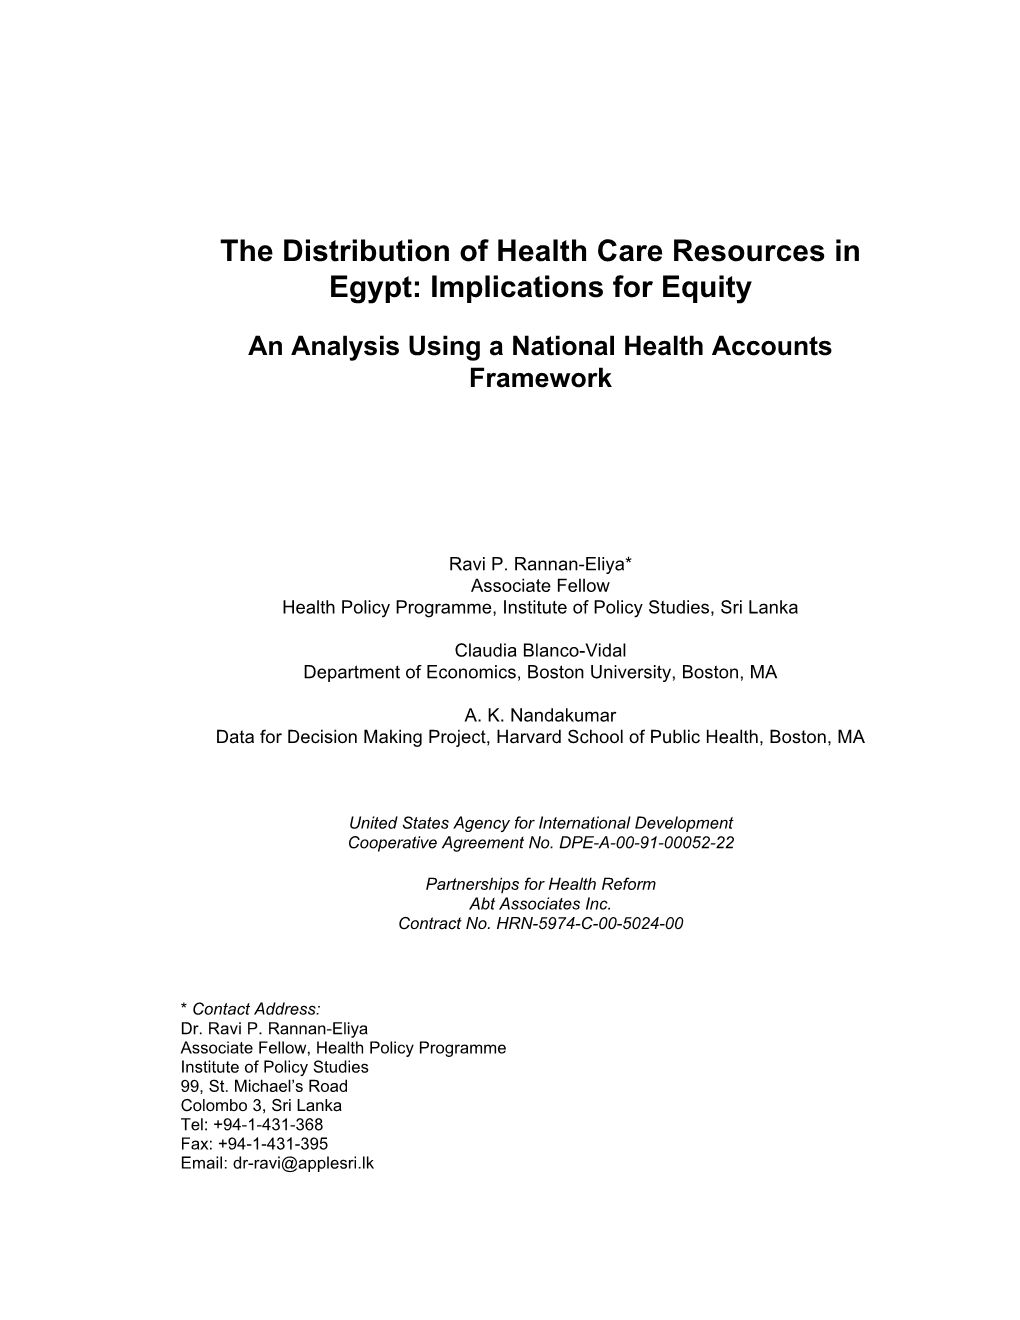 The Distribution of Health Care Resources in Egypt: Implications for Equity